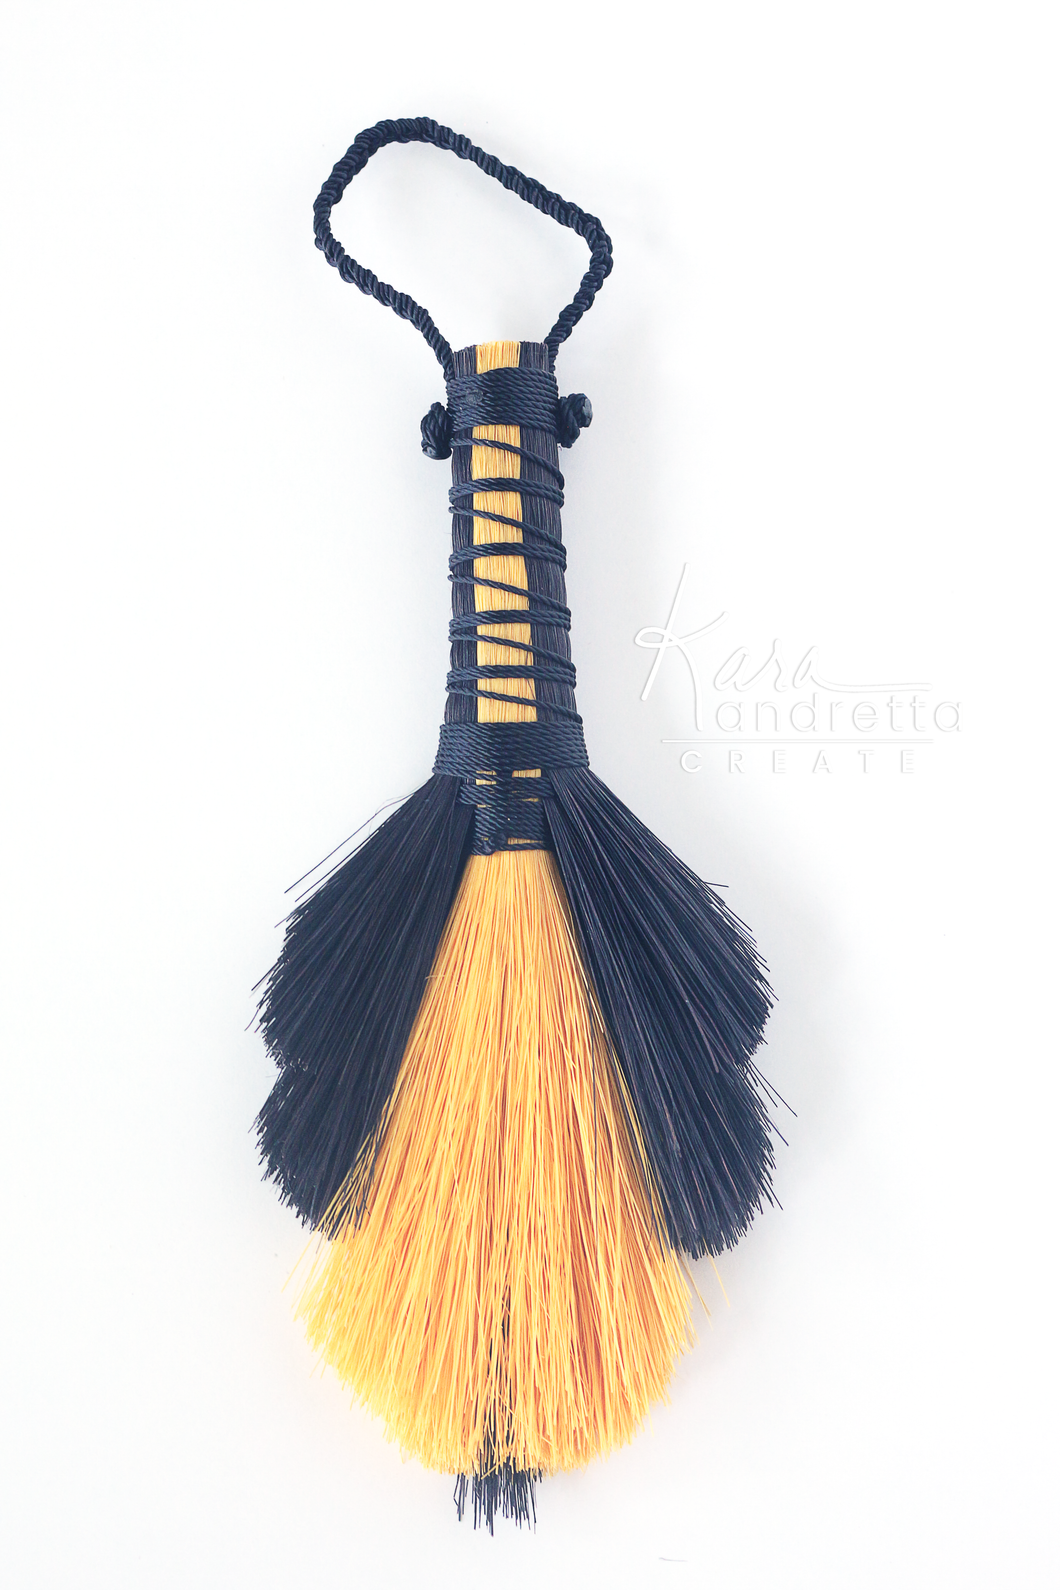 BIG BUMBLE Altar Whisk